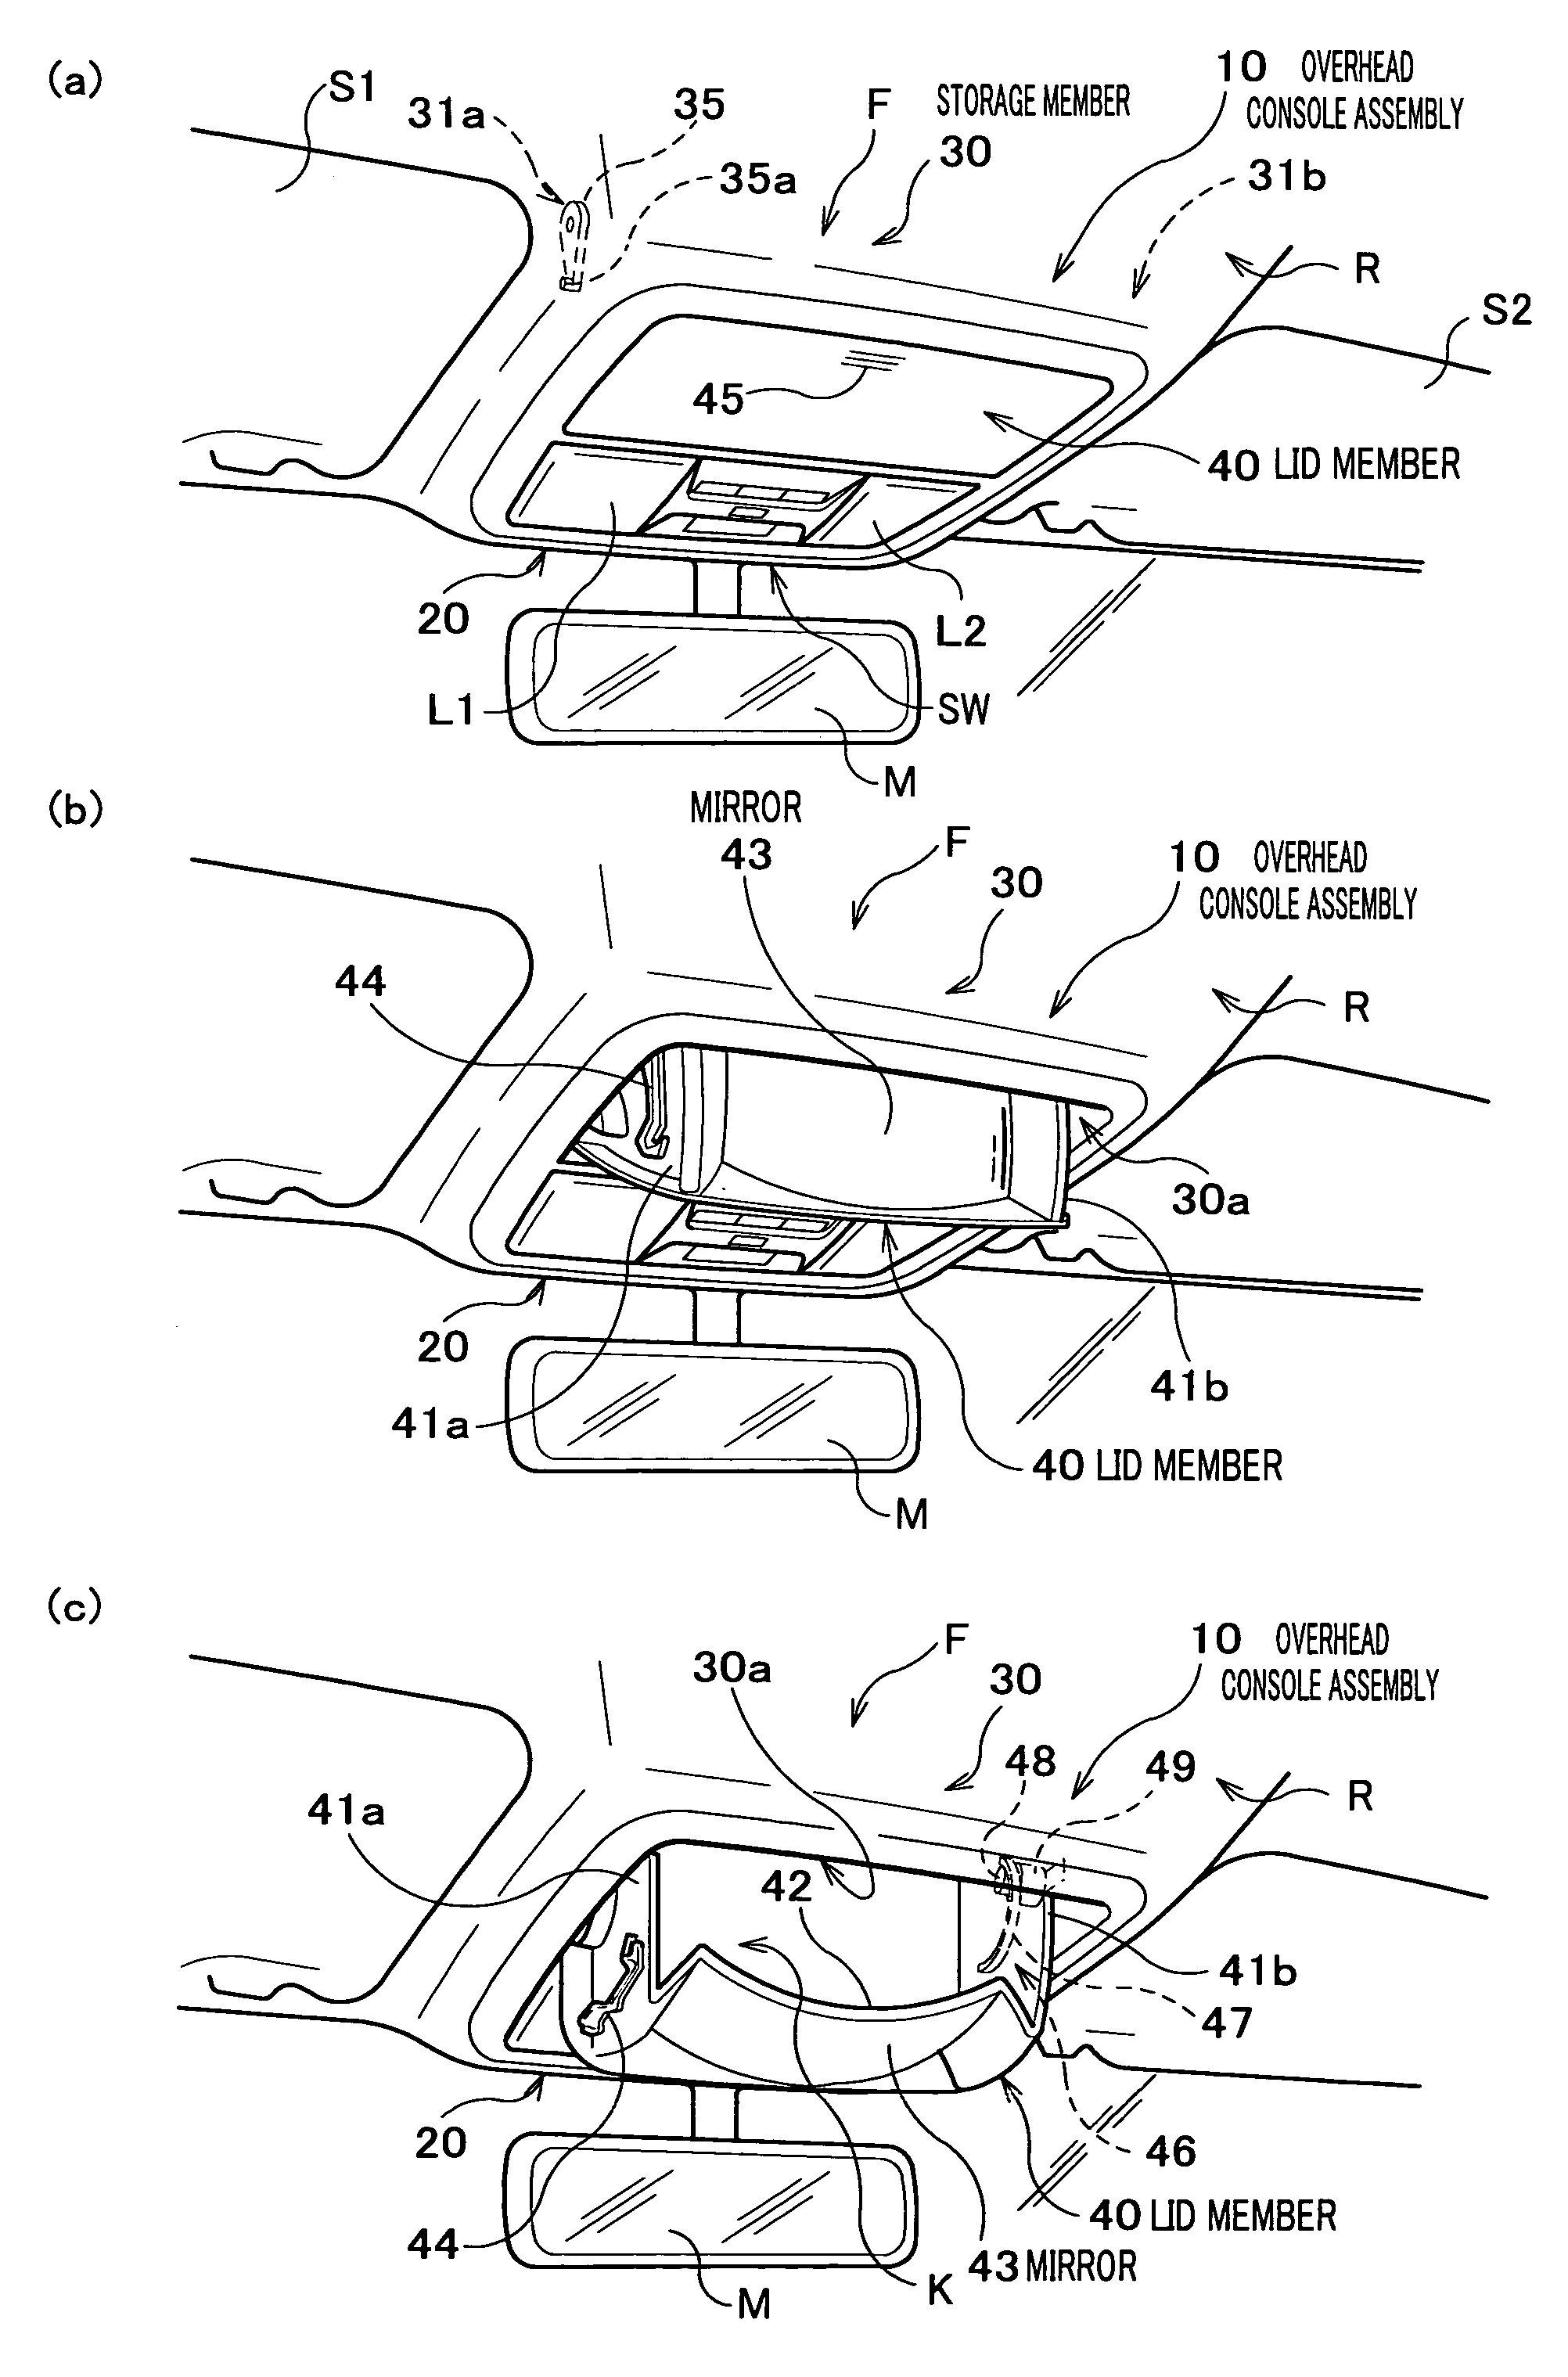 Overhead console assembly